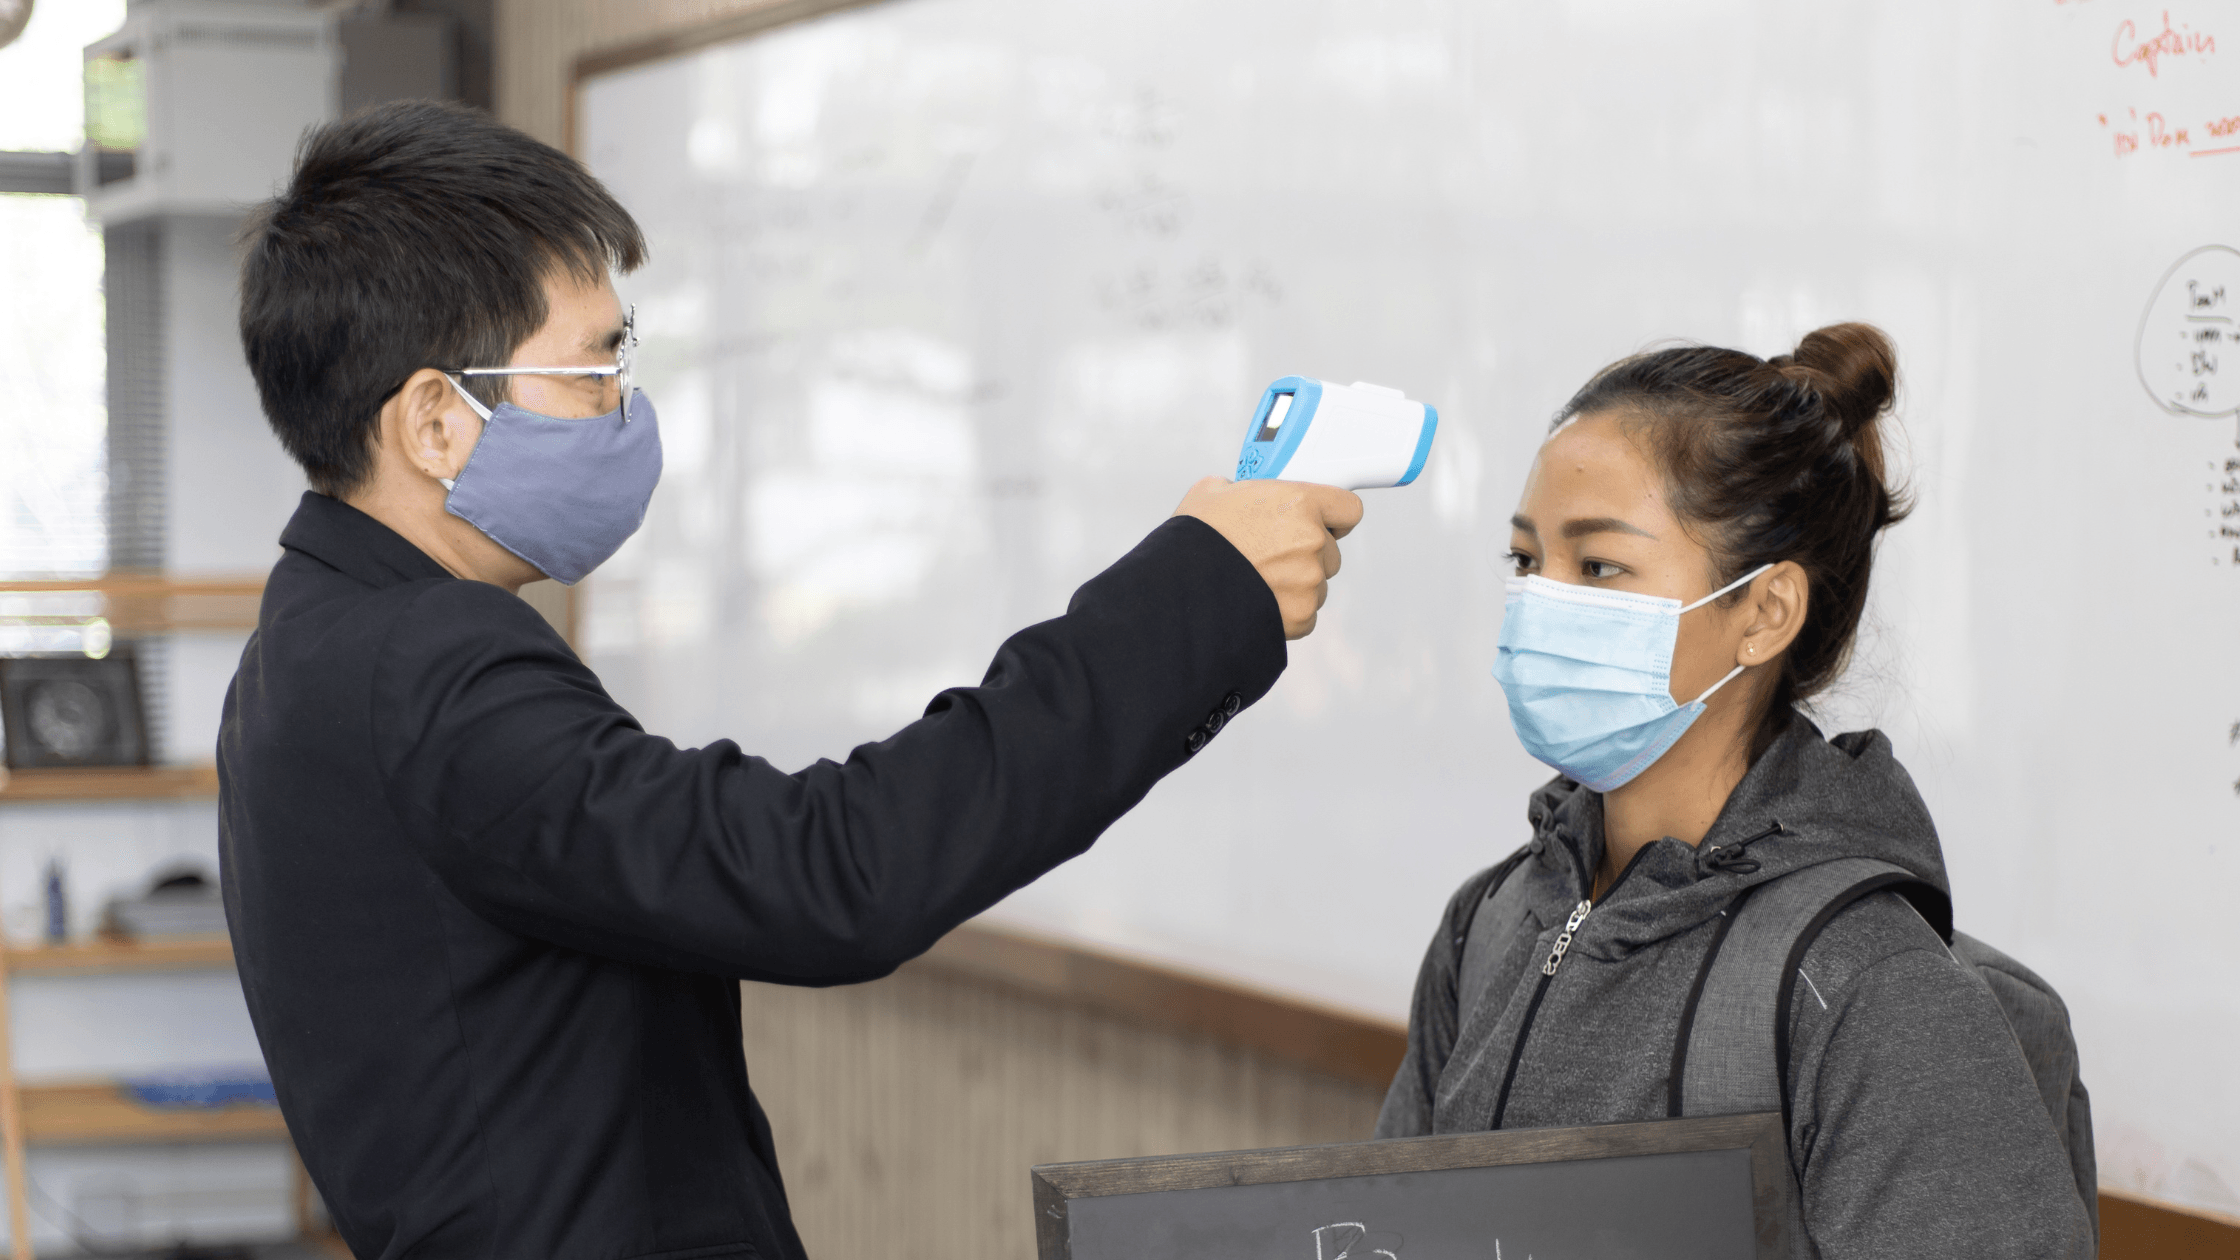 How To Avoid Coronavirus Asian Discrimination in the Workplace